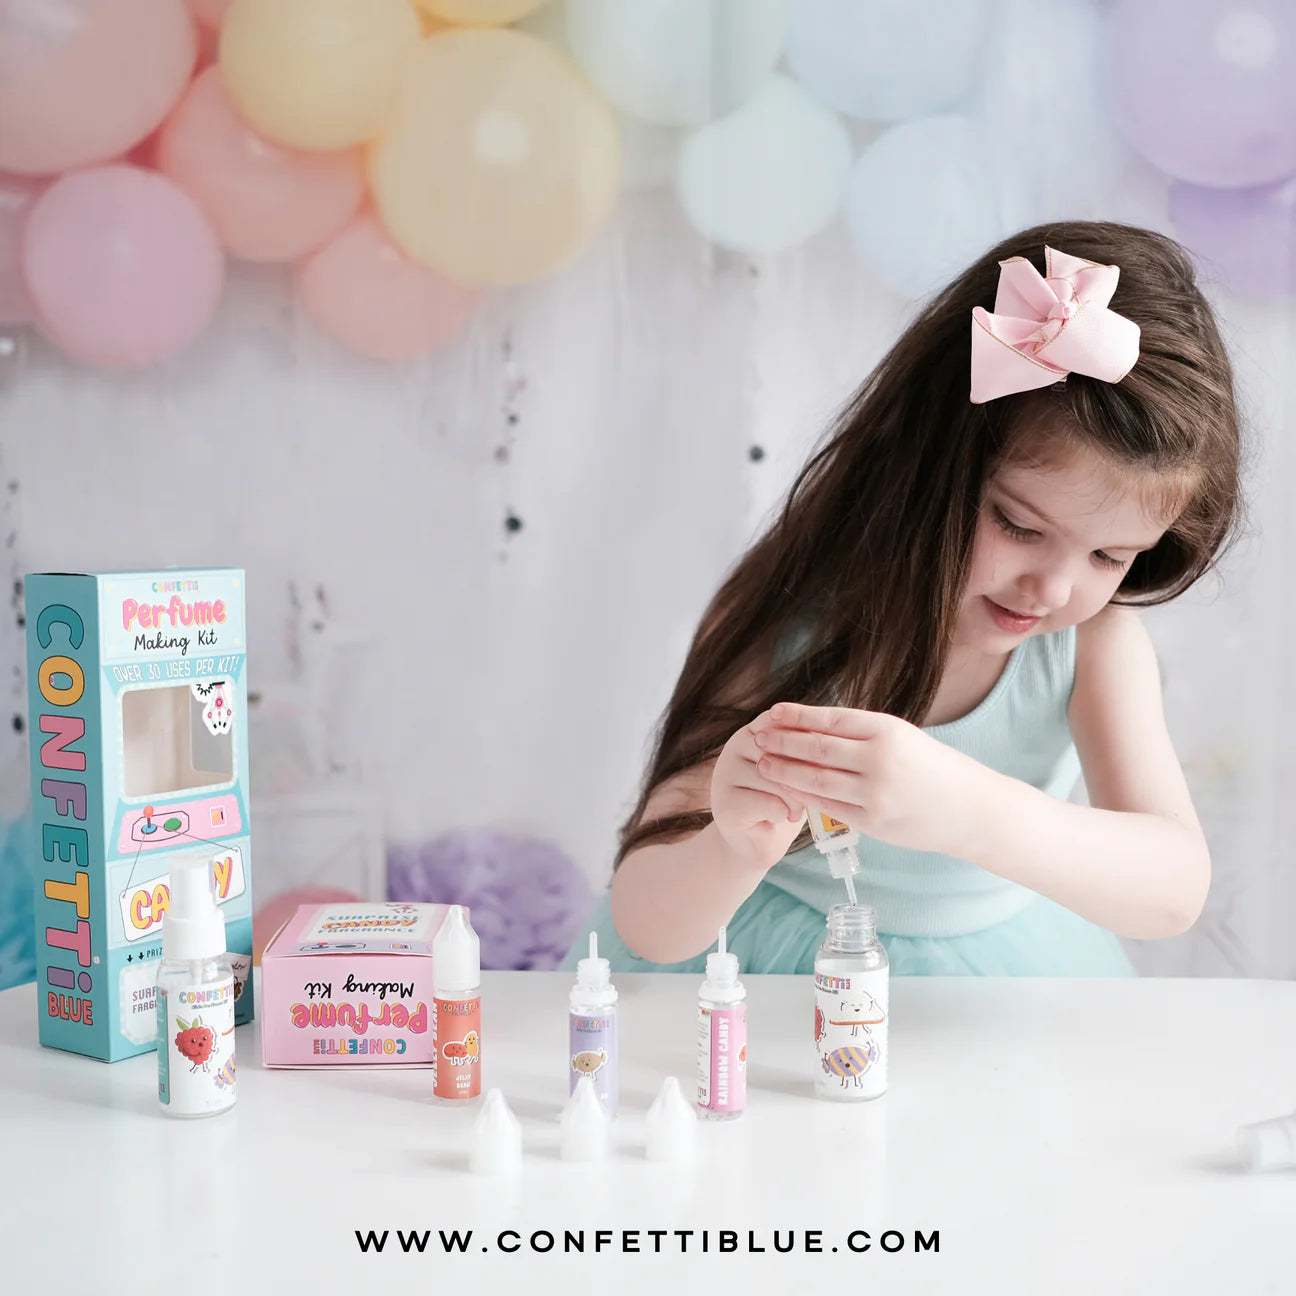 Confetti Blue Candy Scented Perfume Making Kit